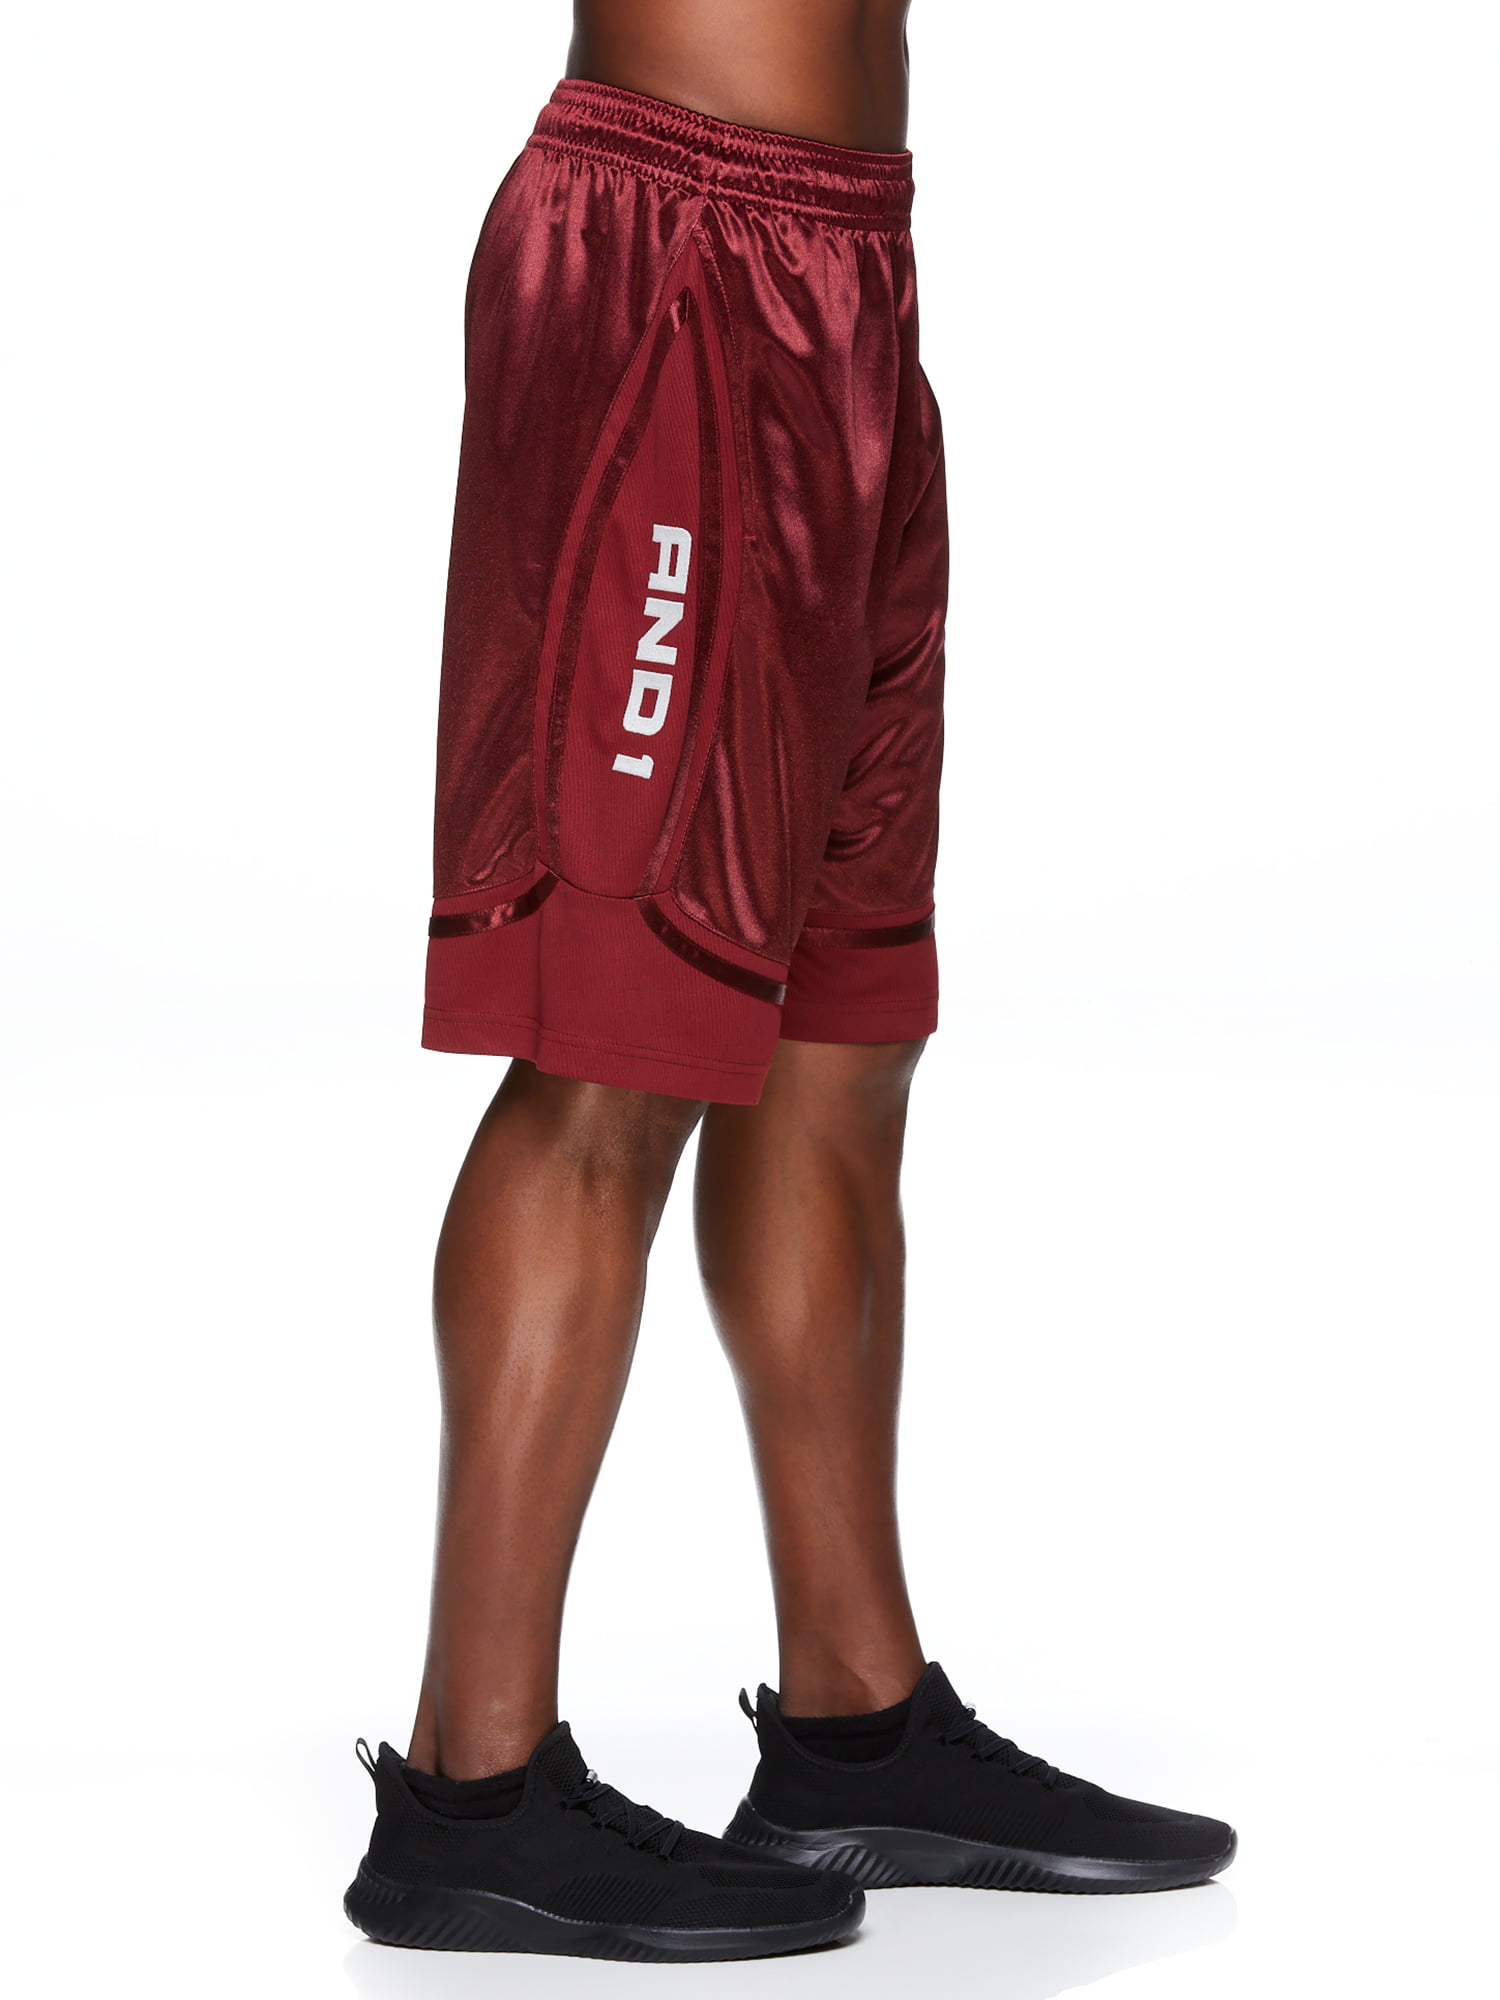 *** New Mens Basketball Shorts by And1.**Adjustable Elastic Waist Size L.*** 